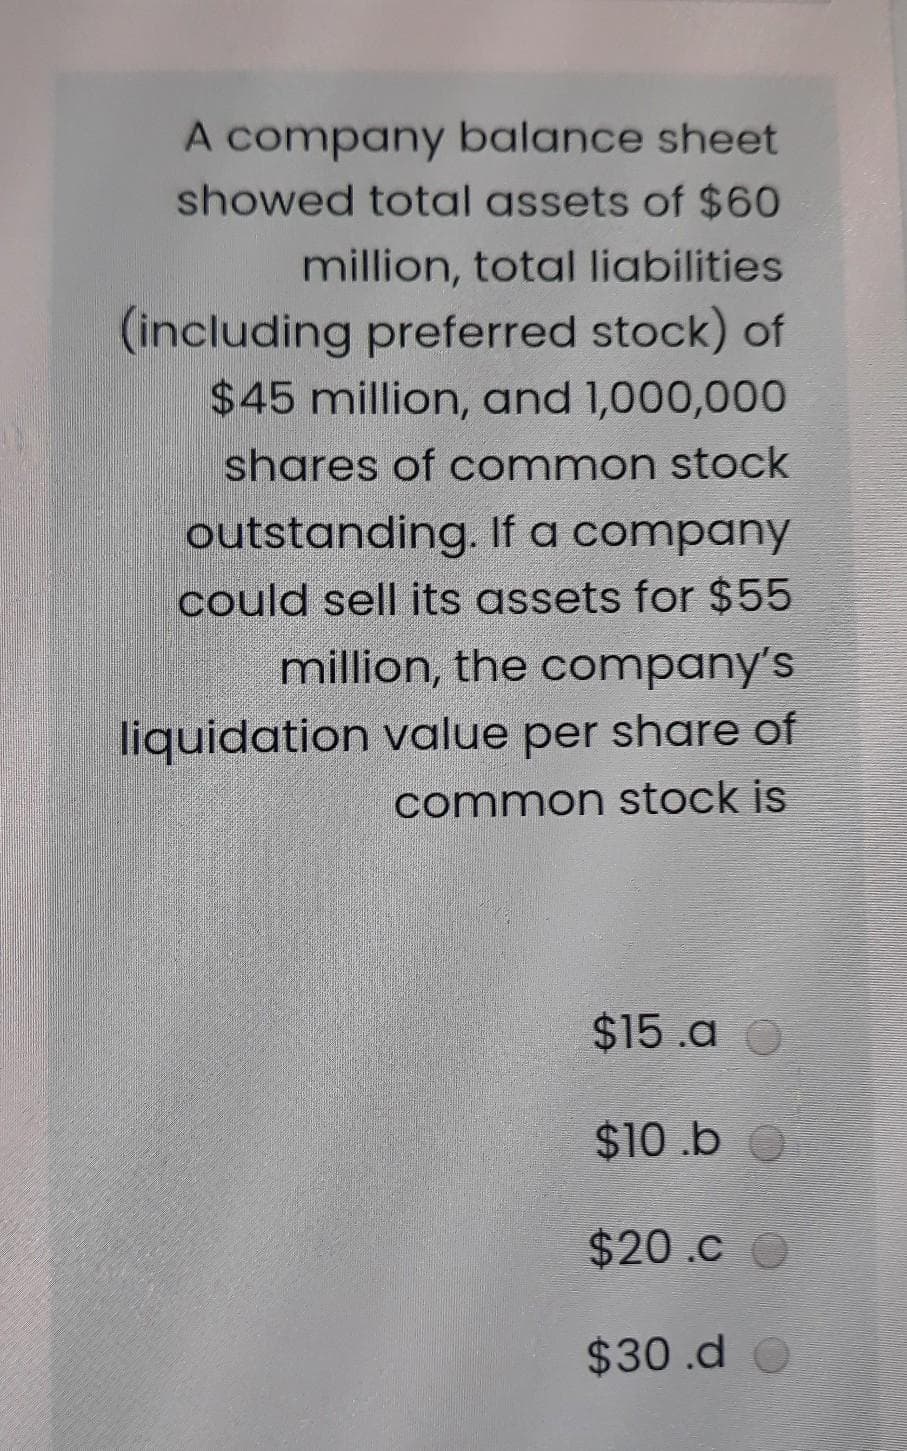 A company balance sheet
showed total assets of $60
million, total liabilities
(including preferred stock) of
$45 million, and 1,000,000
shares of common stock
outstanding, If a company
could sell its assets for $55
million, the company's
liquidation value per share of
common stock is
$15.a O
$10.b
$20.c
$30.d O
